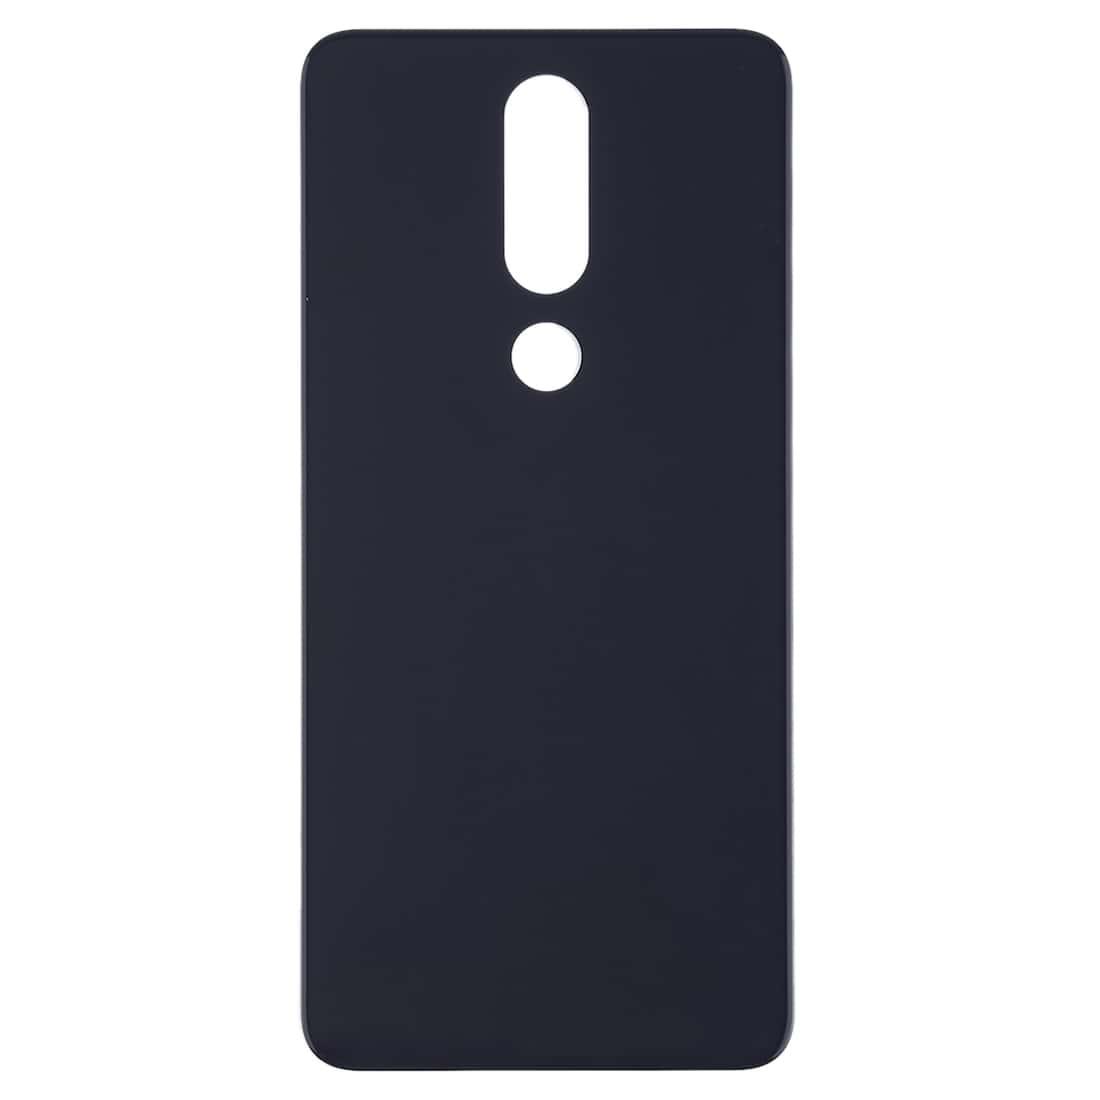 Back Glass Panel for  Nokia 5.1 Plus Blue